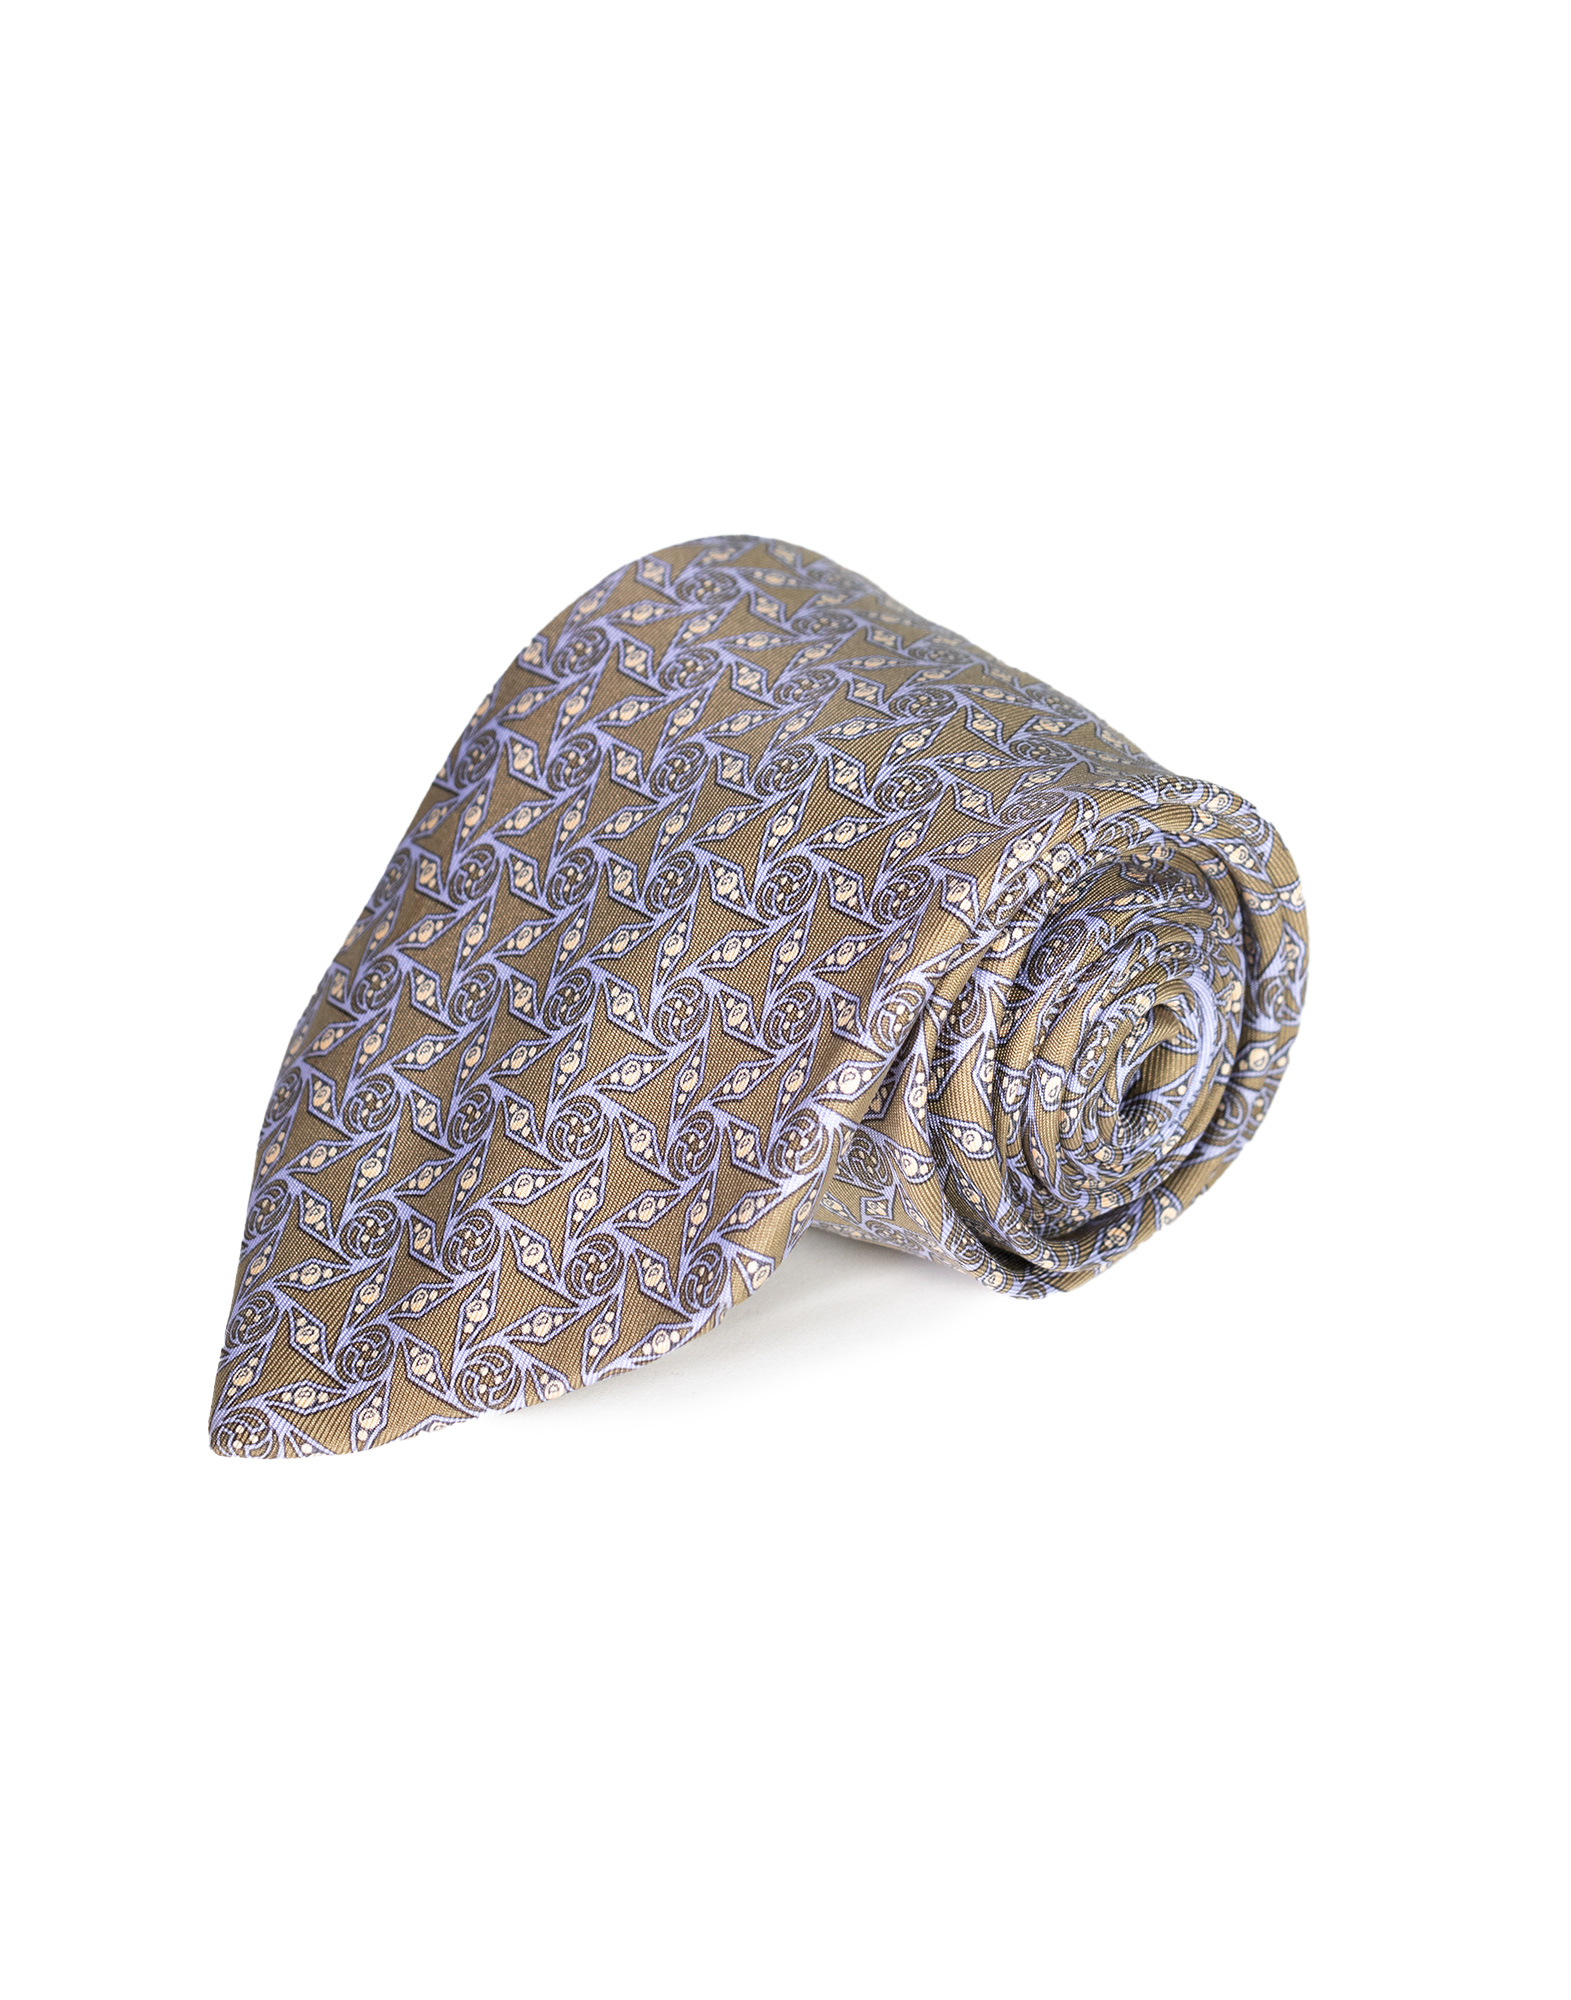 Hermes - Green and light blue tie with pattern